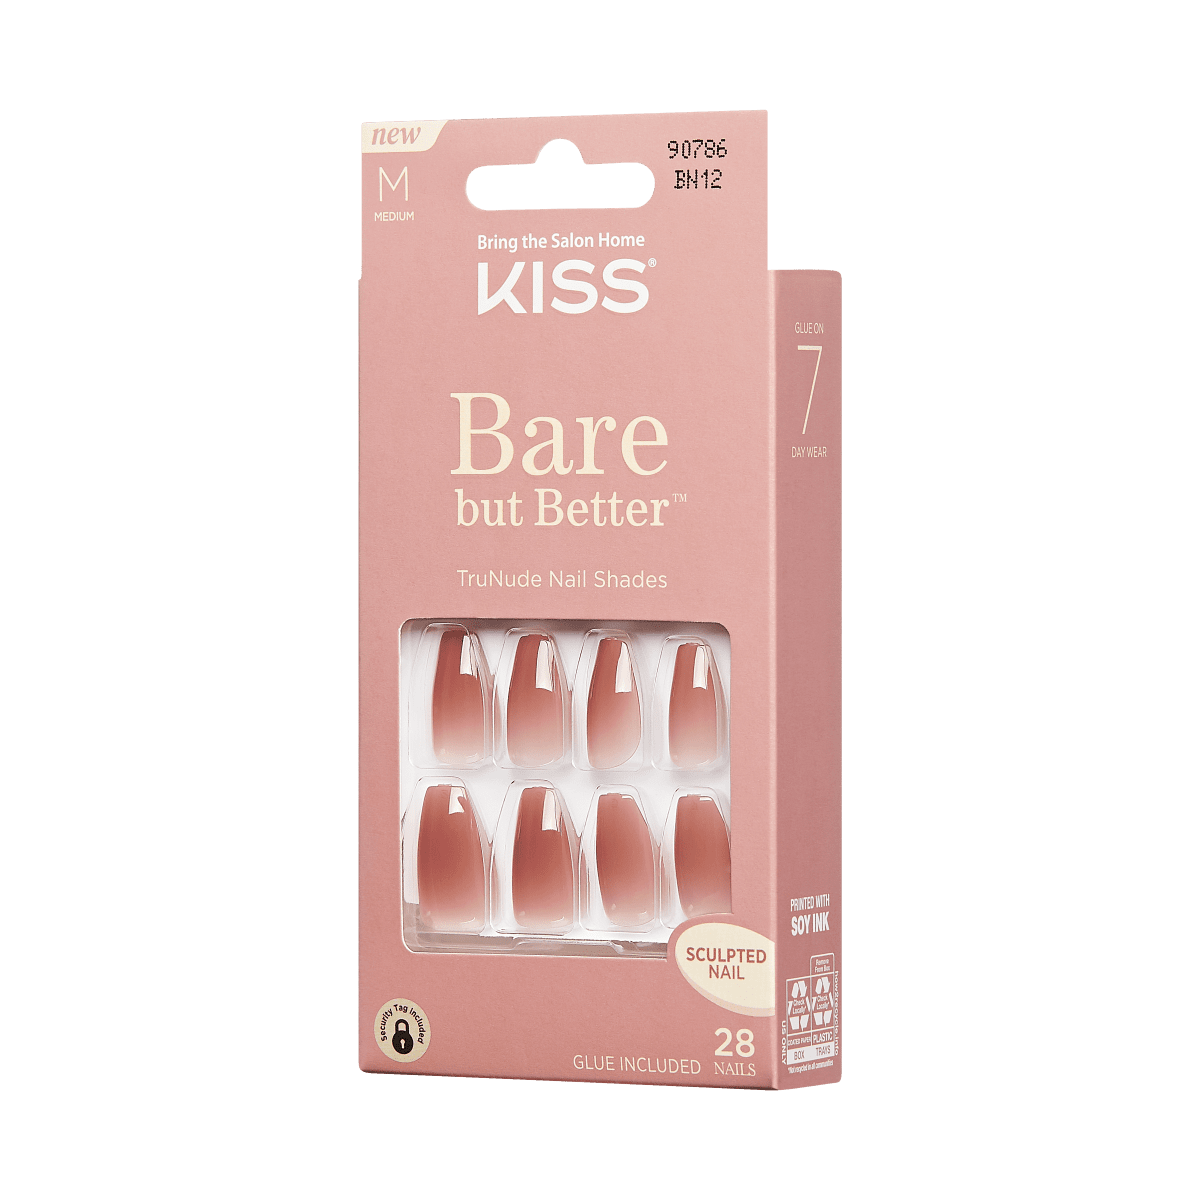 KISS Bare-But-Better Nails - Nude Lipstick